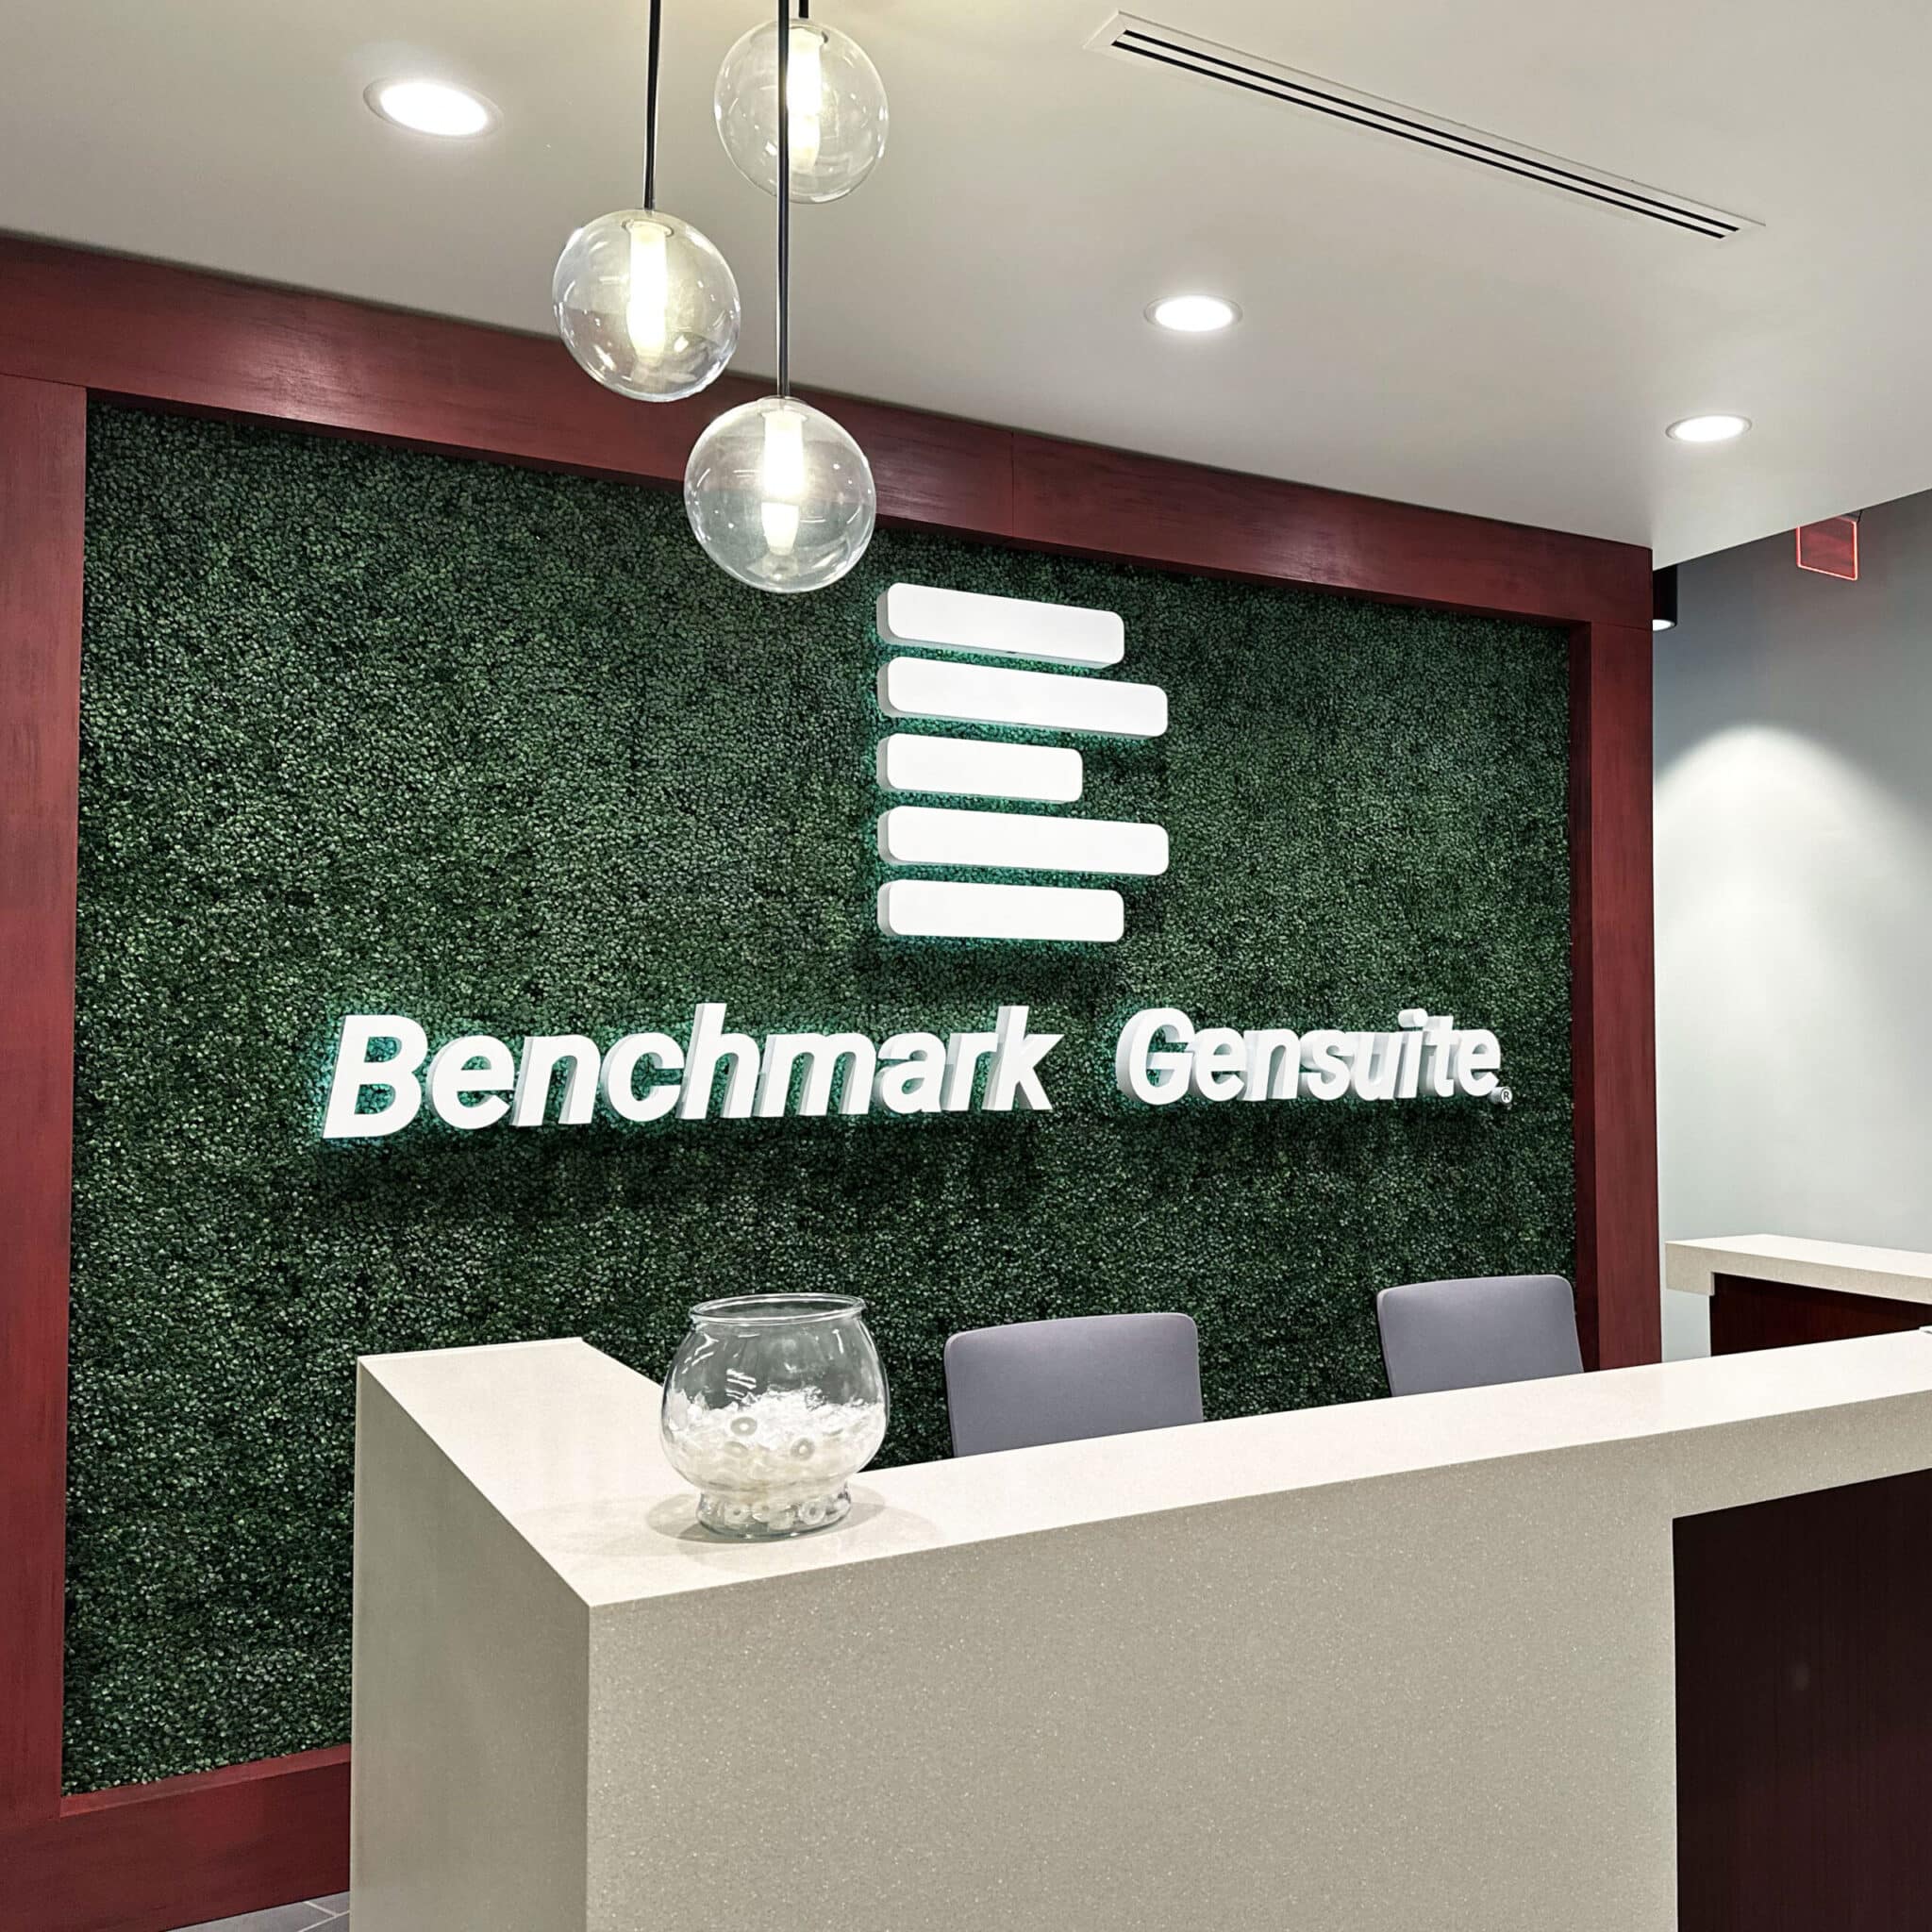 Benchmark Gensuite® Announces Grand Opening of New Global Headquarters in the Greater Cincinnati Area, Pioneering Sustainable Moves and Community Outreach 